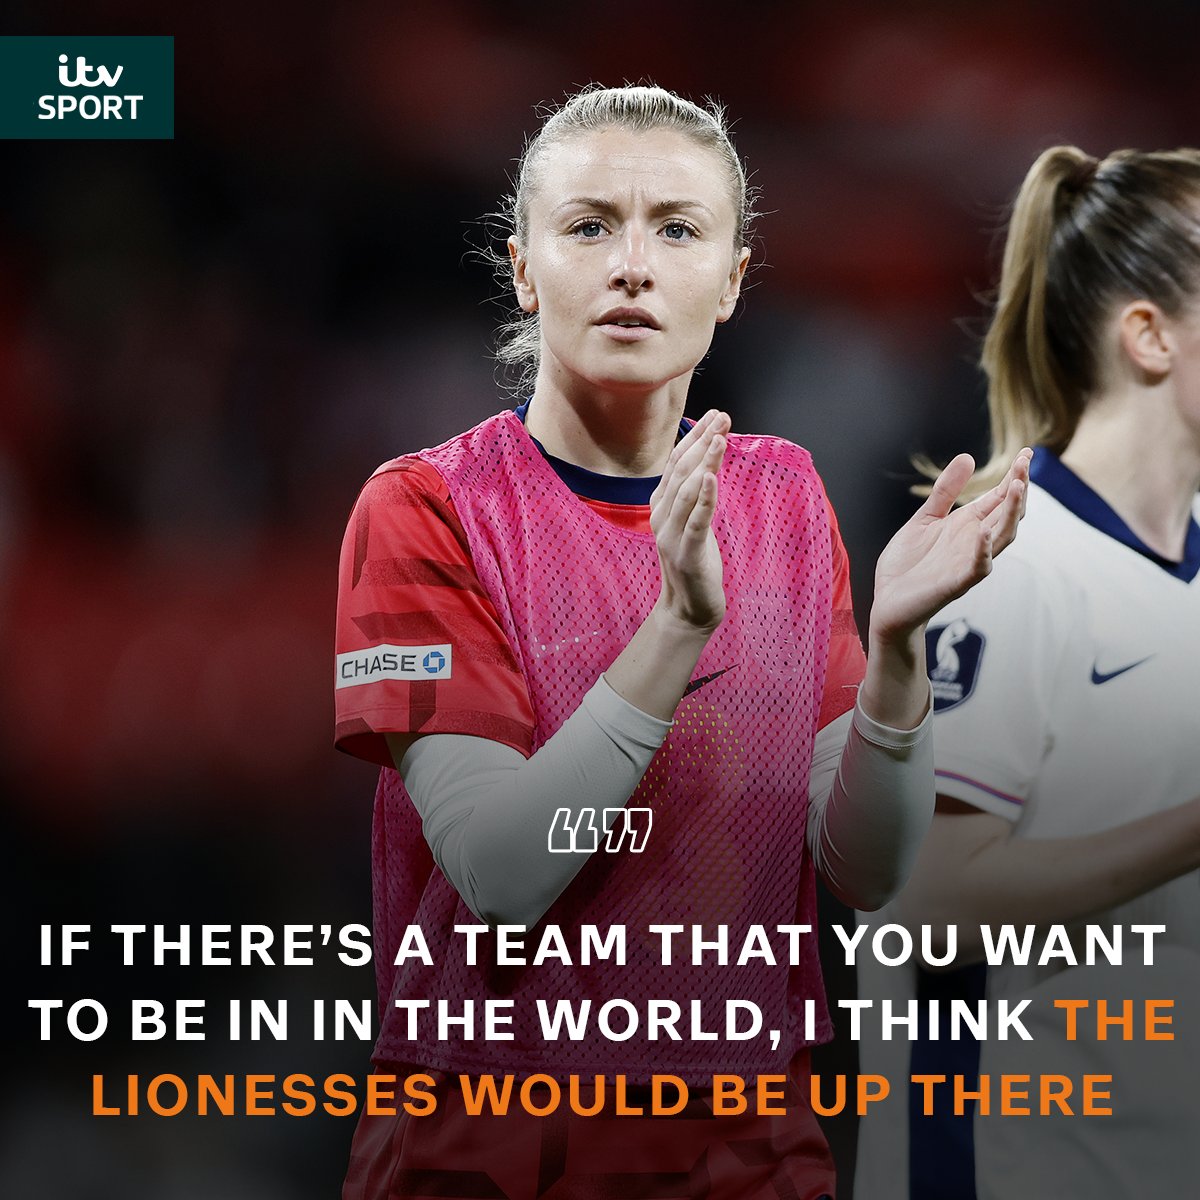 Leah Williamson will start for the #Lionesses against Ireland tomorrow, Wiegman confirms 🚨 When asked about her return to the squad after a year, Williamson said ⤵️